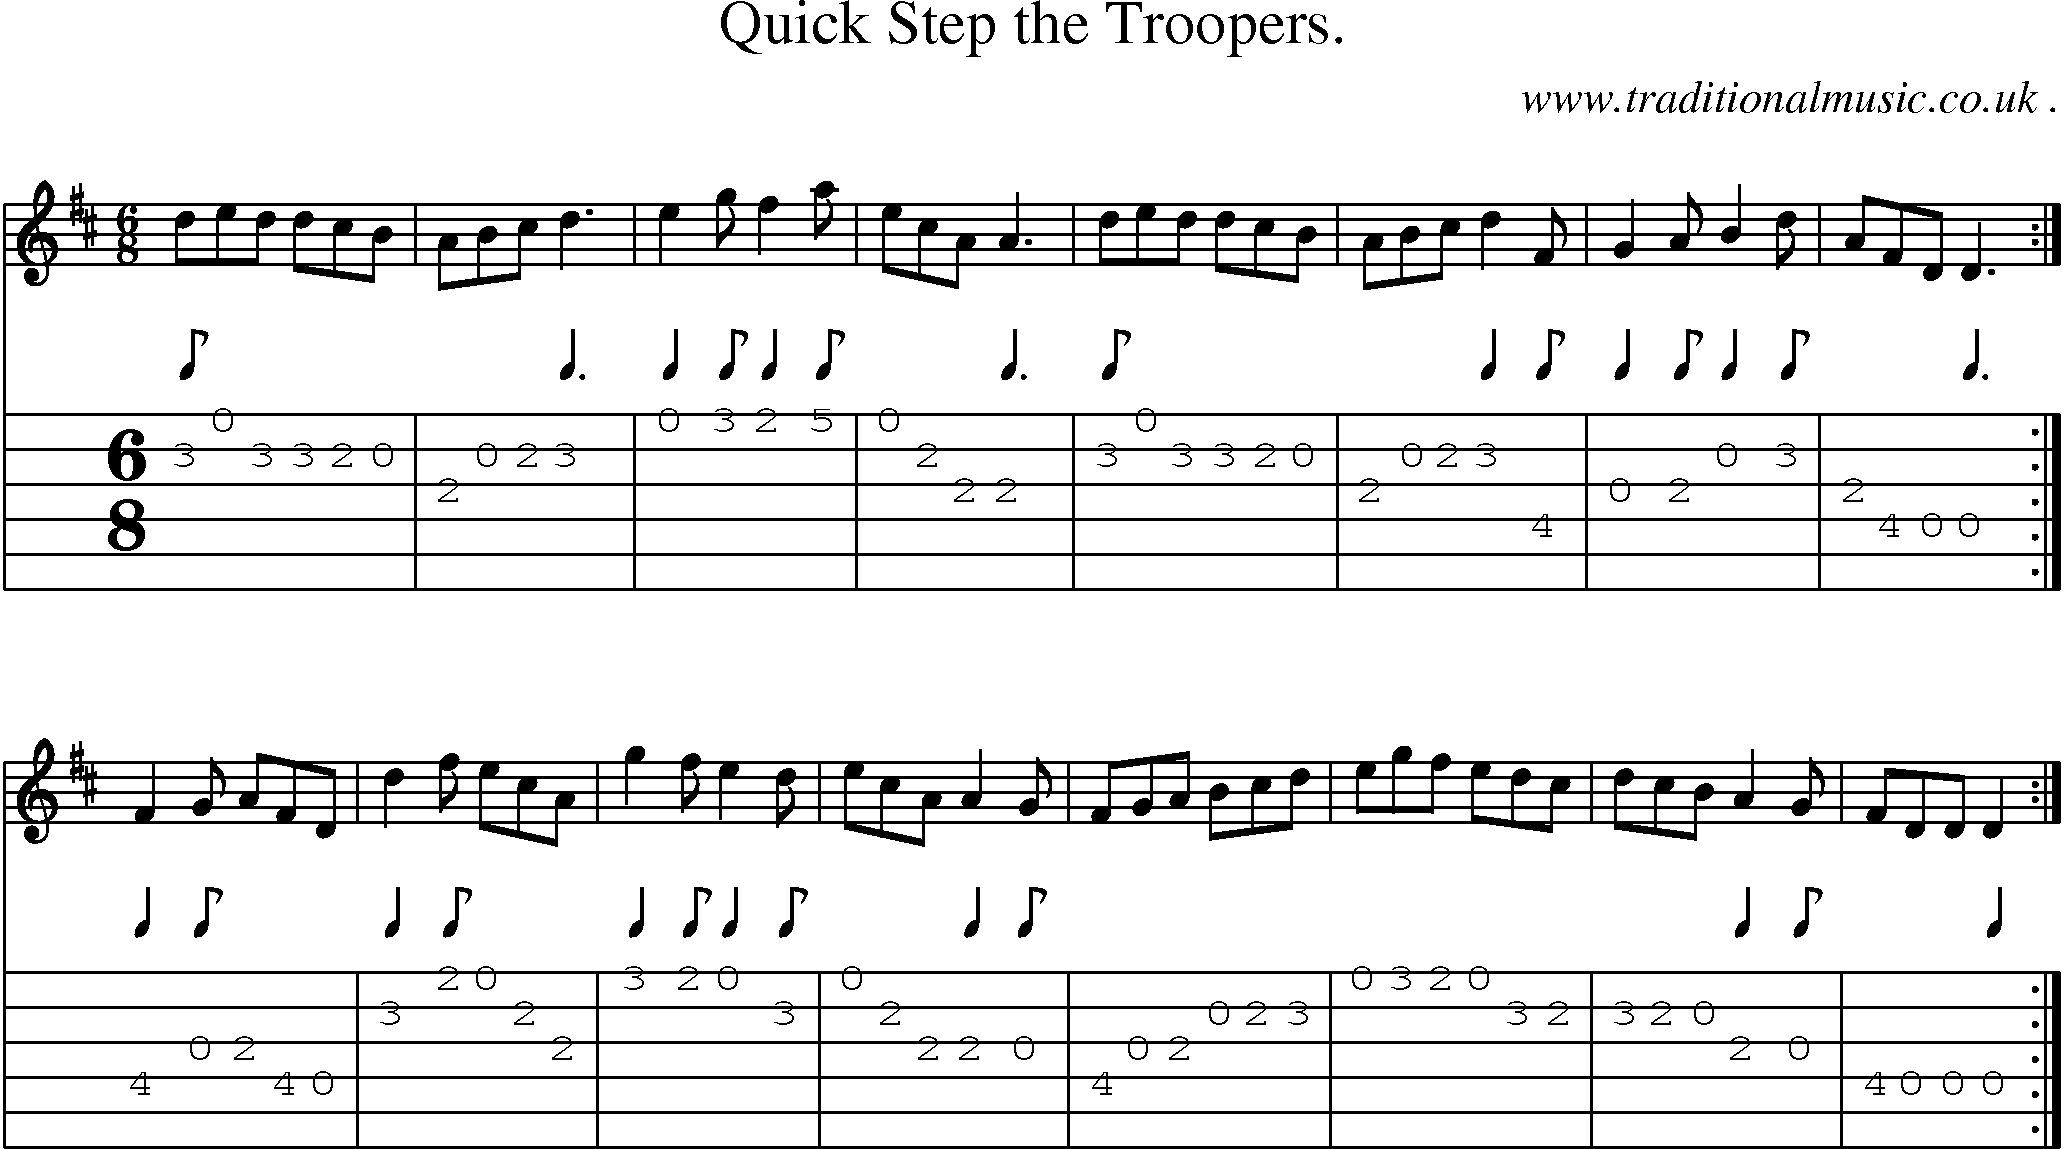 Sheet-Music and Guitar Tabs for Quick Step The Troopers